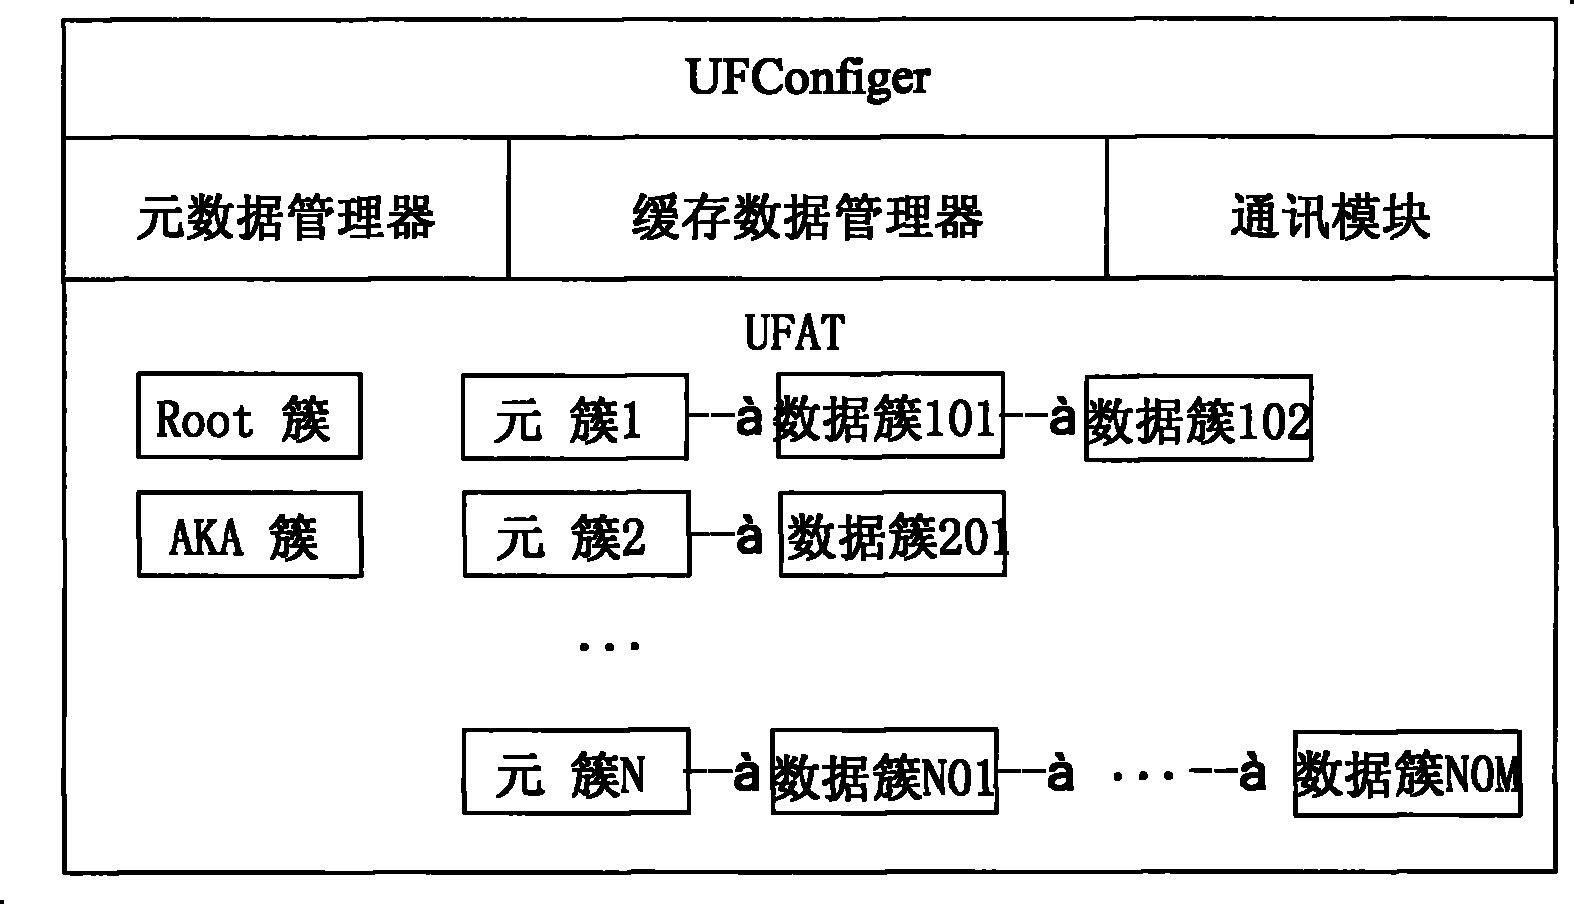 Method and system for storing and managing monitored user configuration information